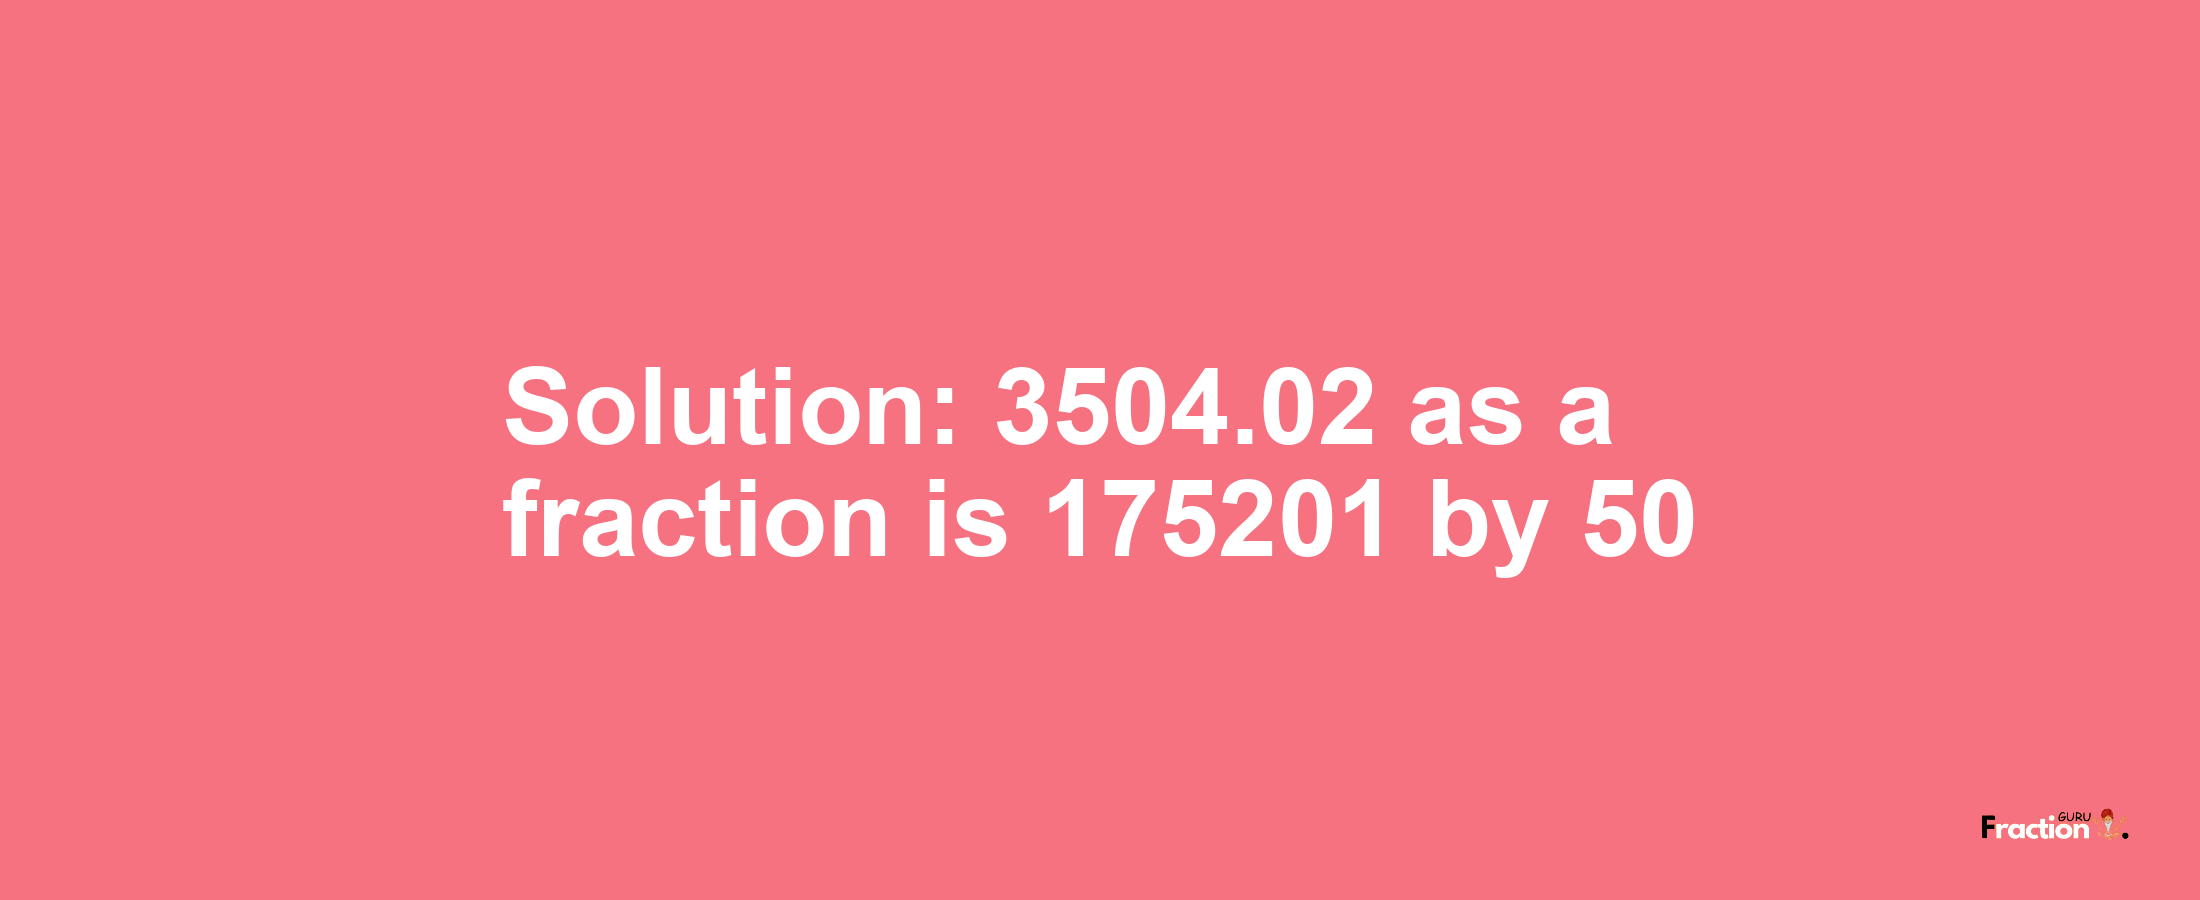 Solution:3504.02 as a fraction is 175201/50